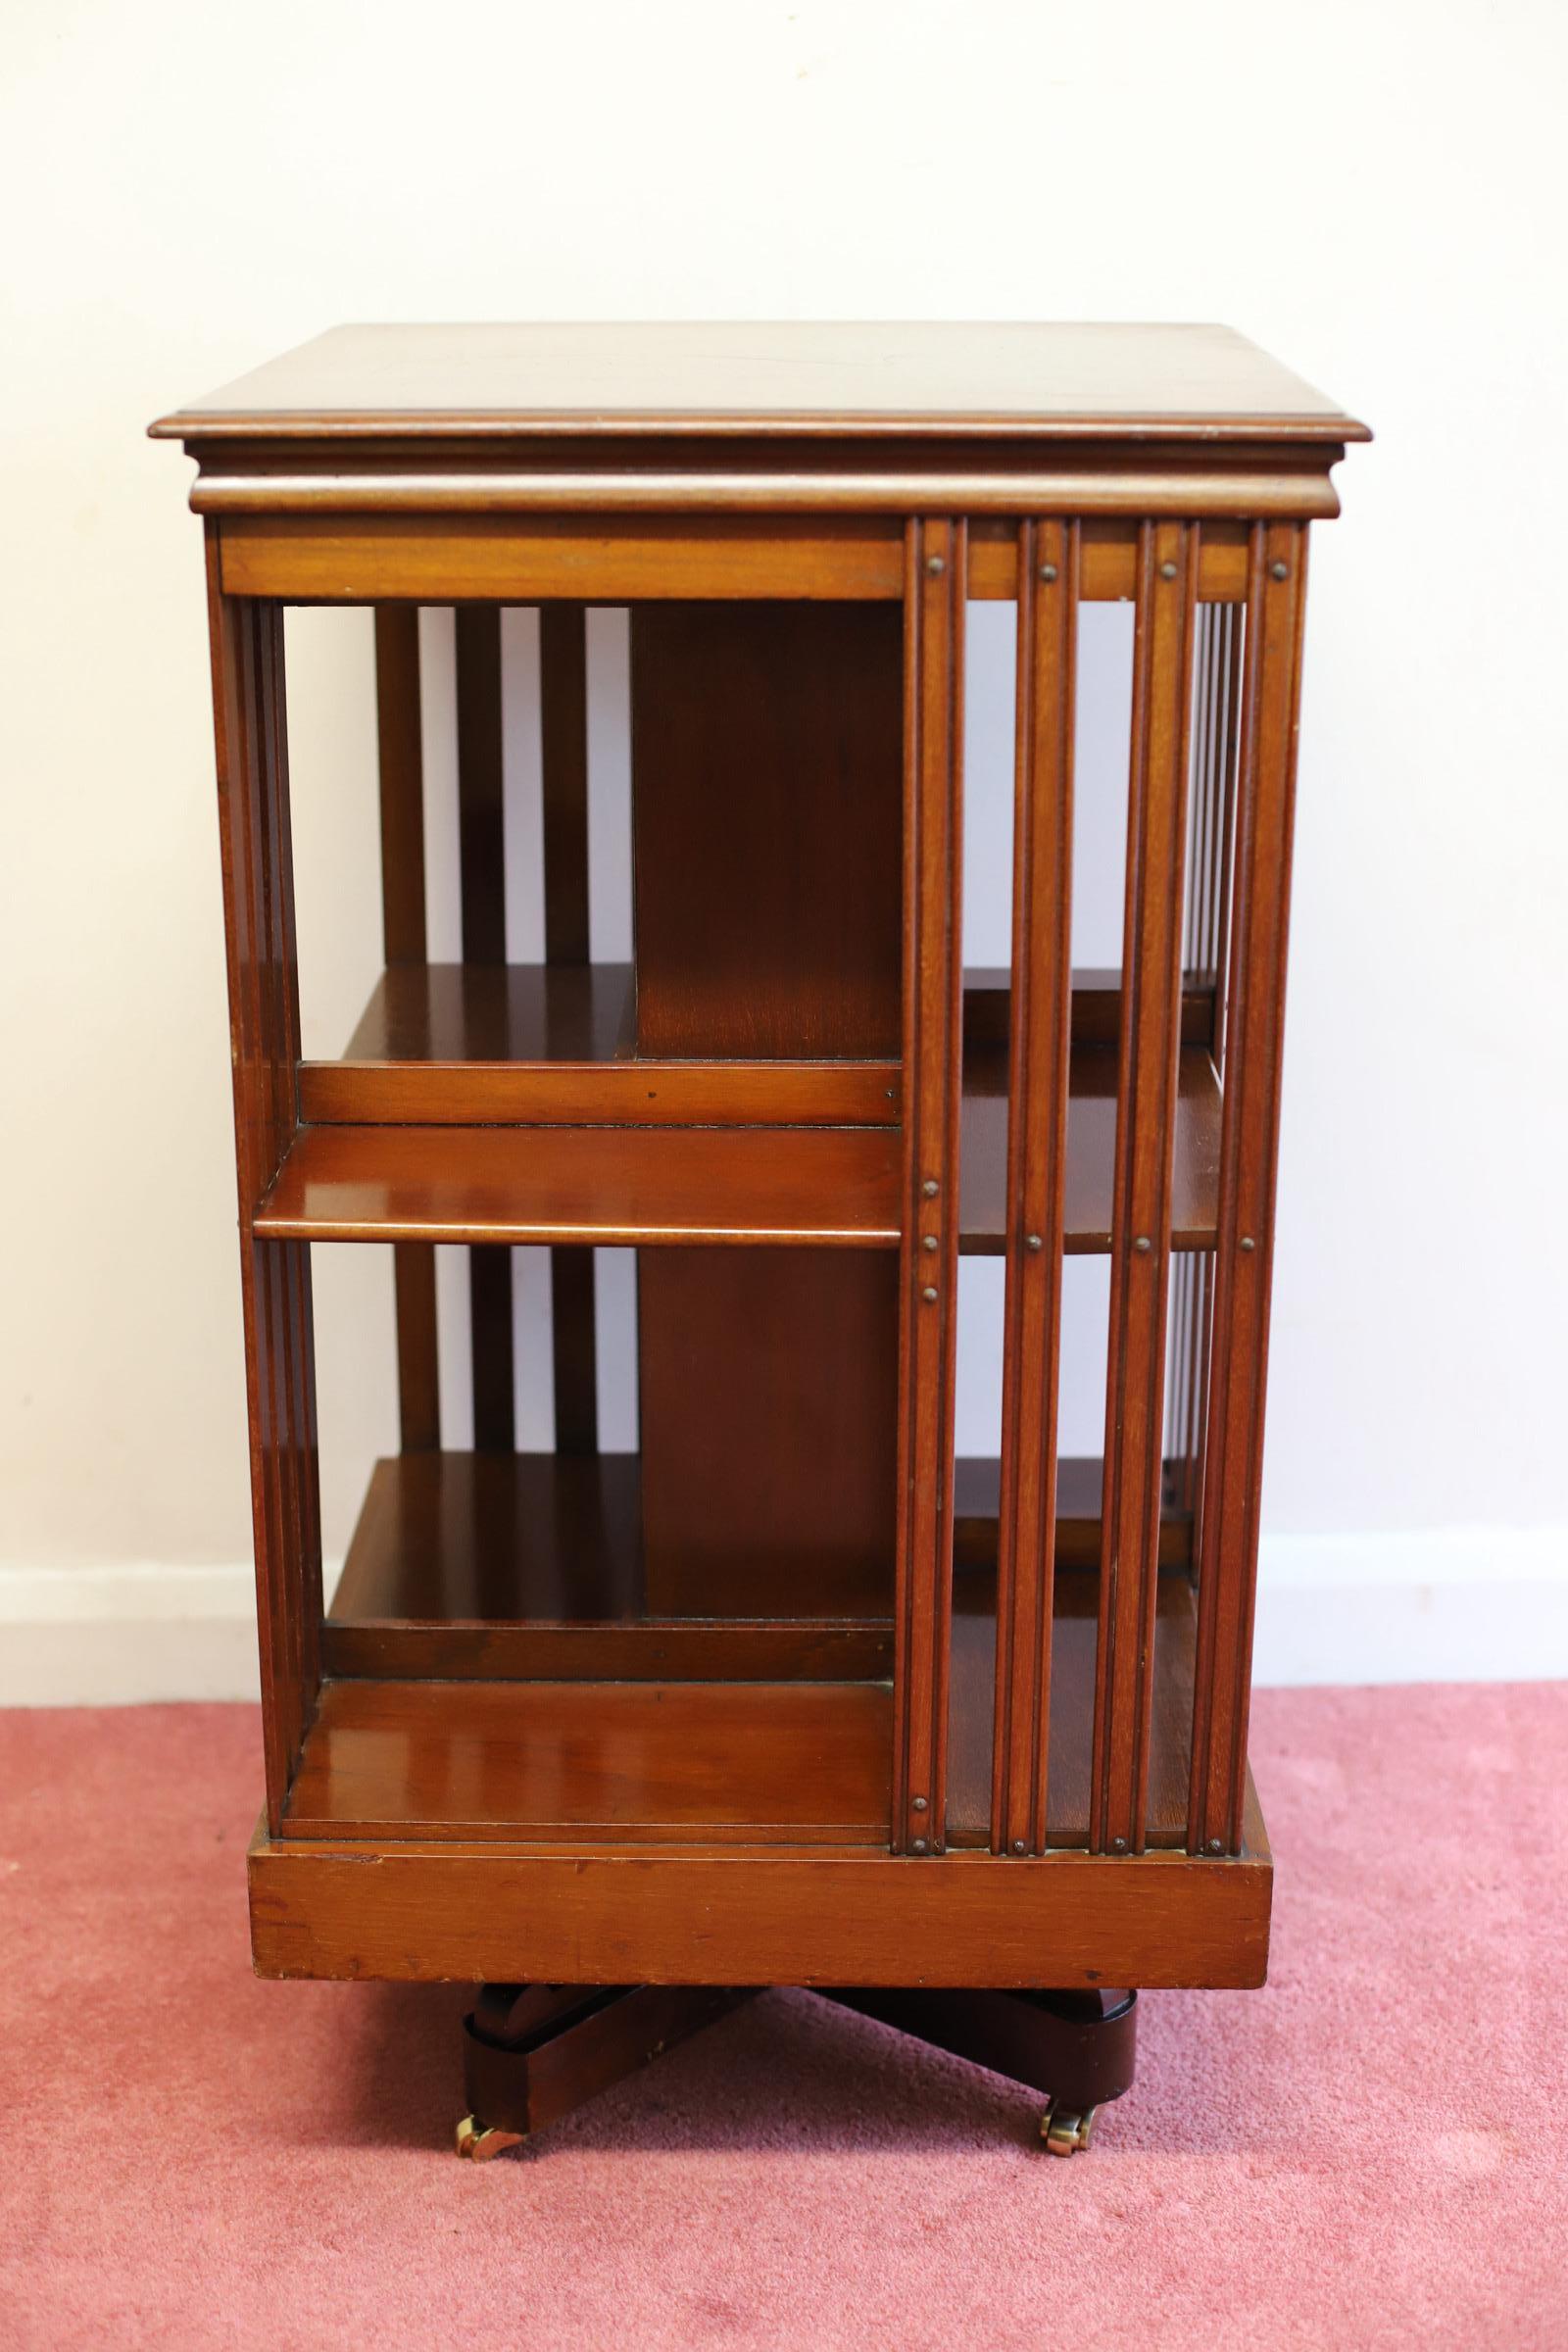 Antique Edwardian Revolving Bookcase  In Fair Condition For Sale In Crawley, GB